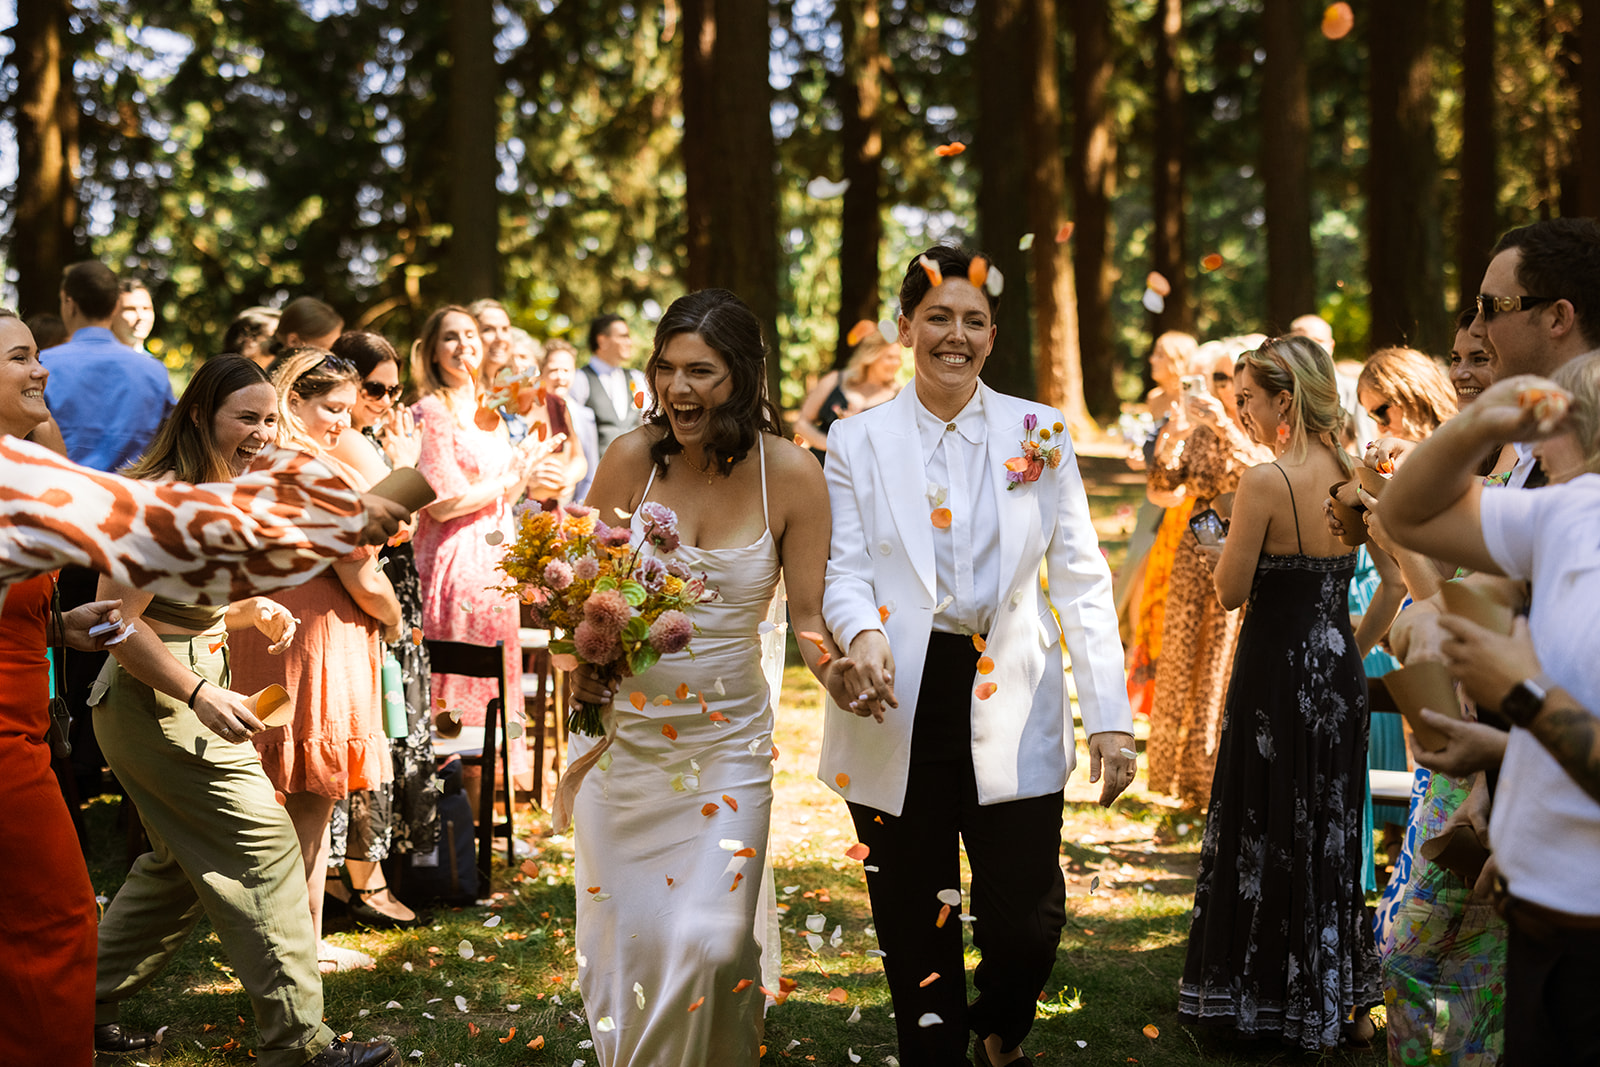 A queer couple walks hand in hand receding down their wedding aisle as their guests throw confetti, cheer, and clap, outside in a Portland park.